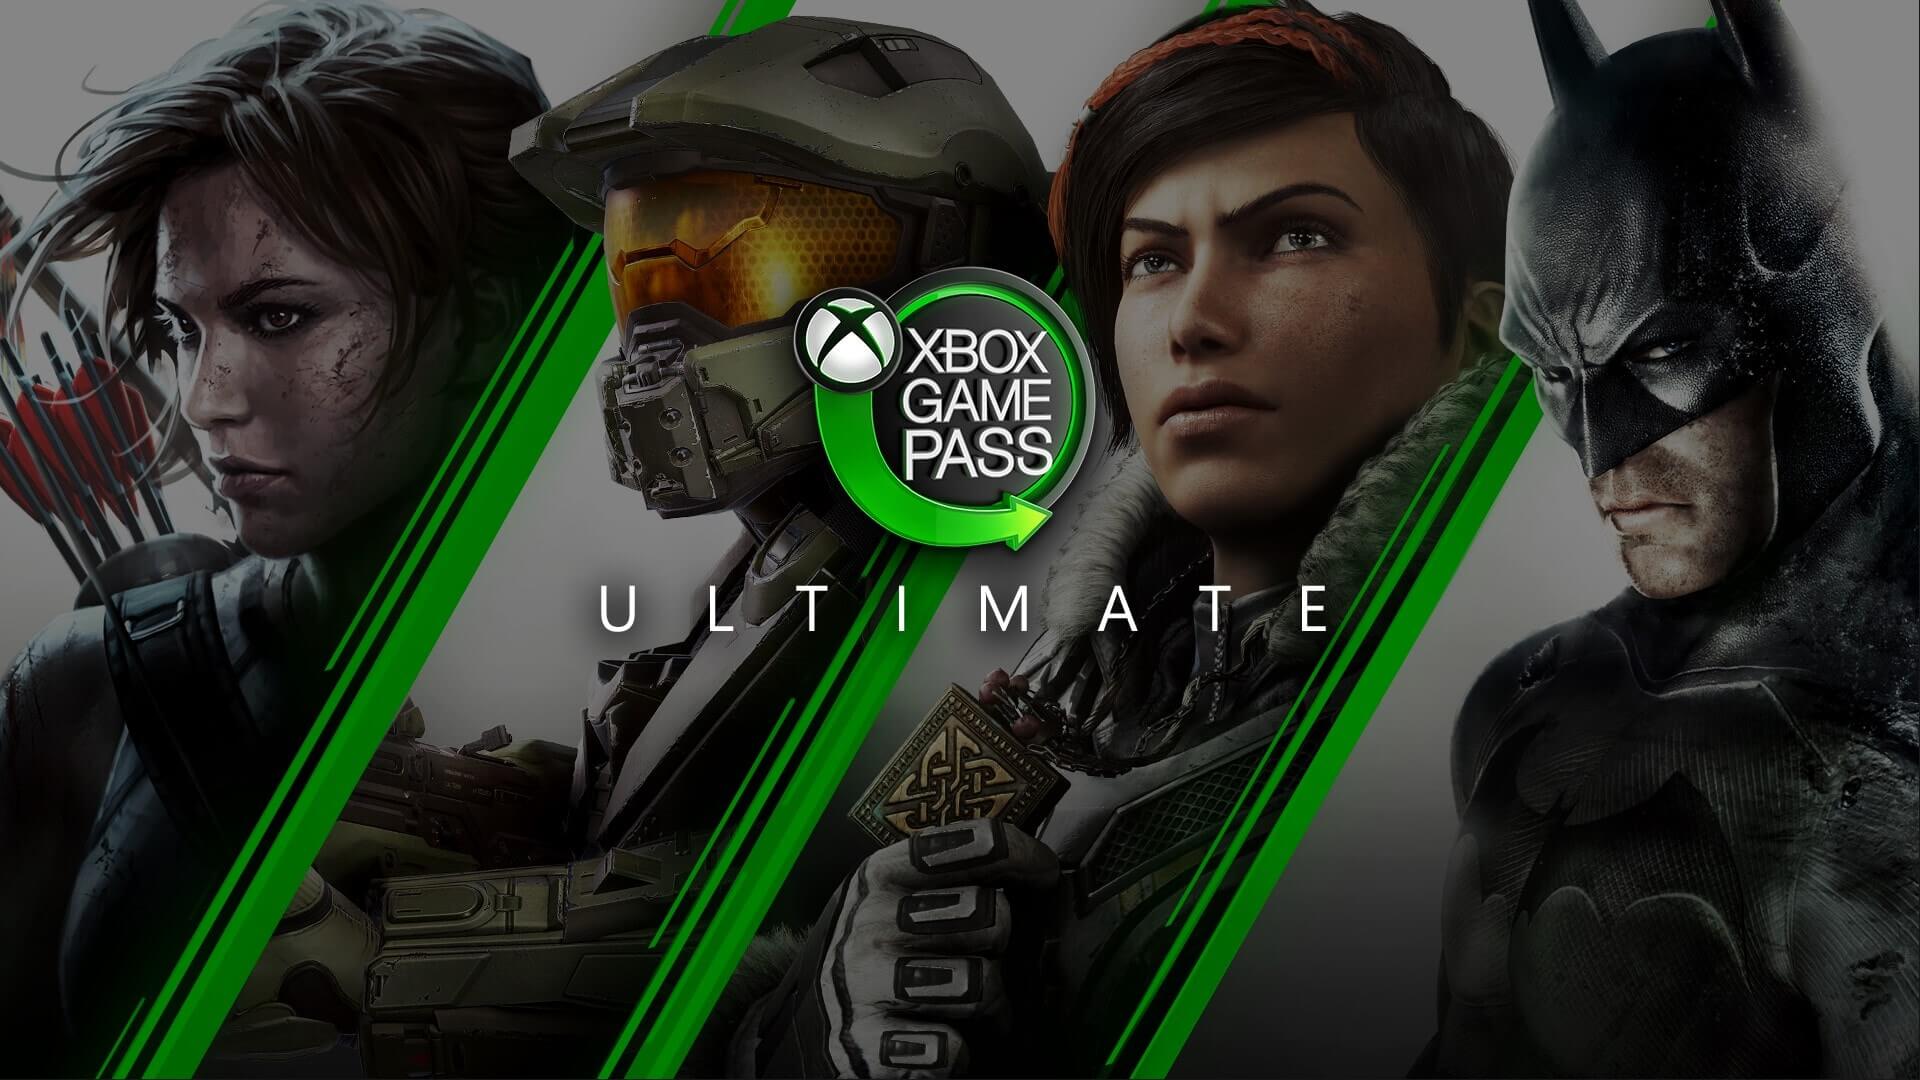 Xbox Game Pass Ultimate includes PC and Xbox games for $14.99 per month